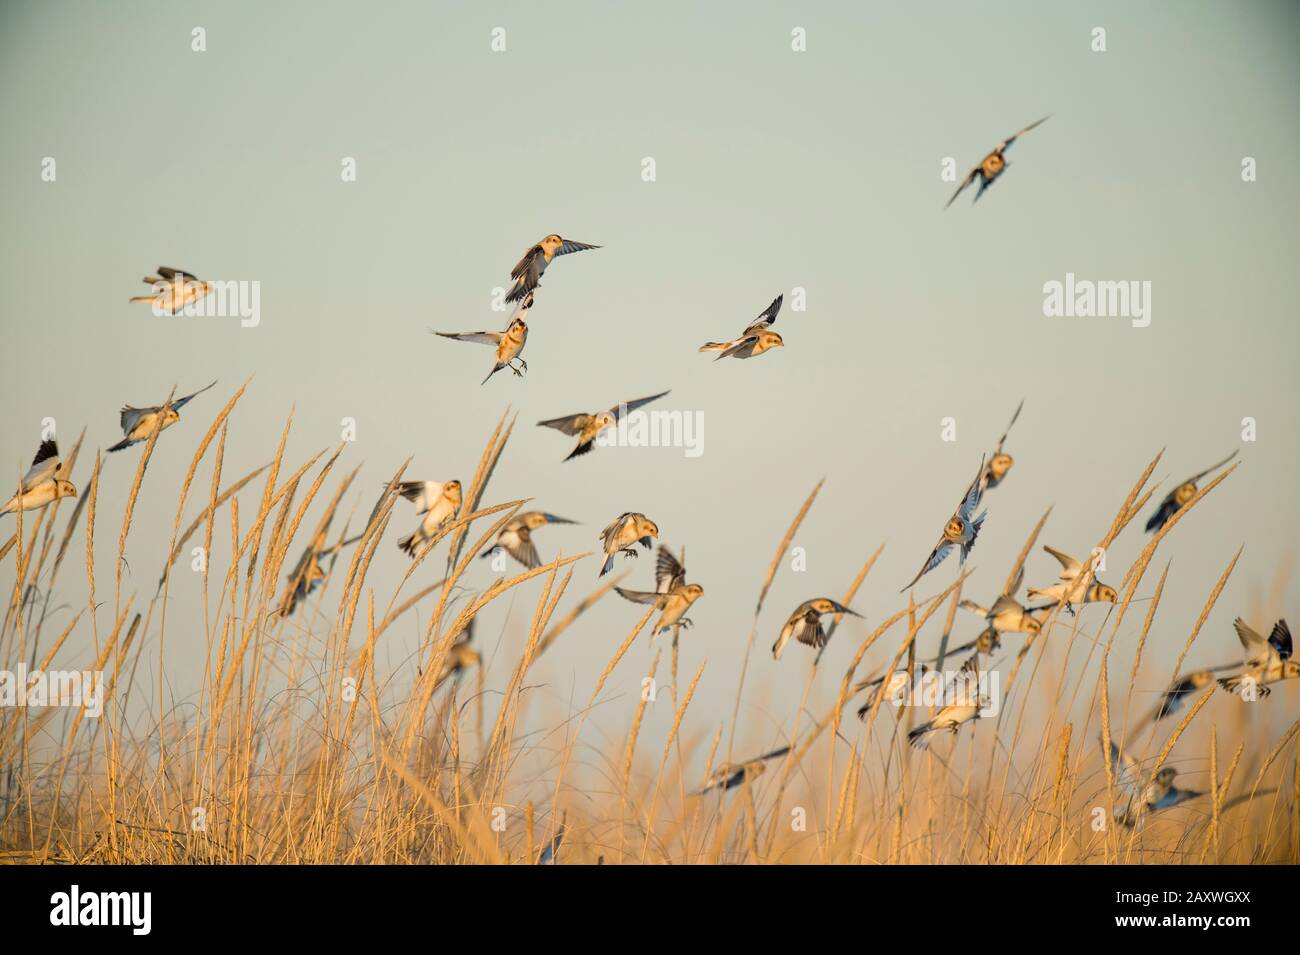 A flock of Snow Buntings flying and landing in the golden dune grasses in the bright sunlight. Stock Photo